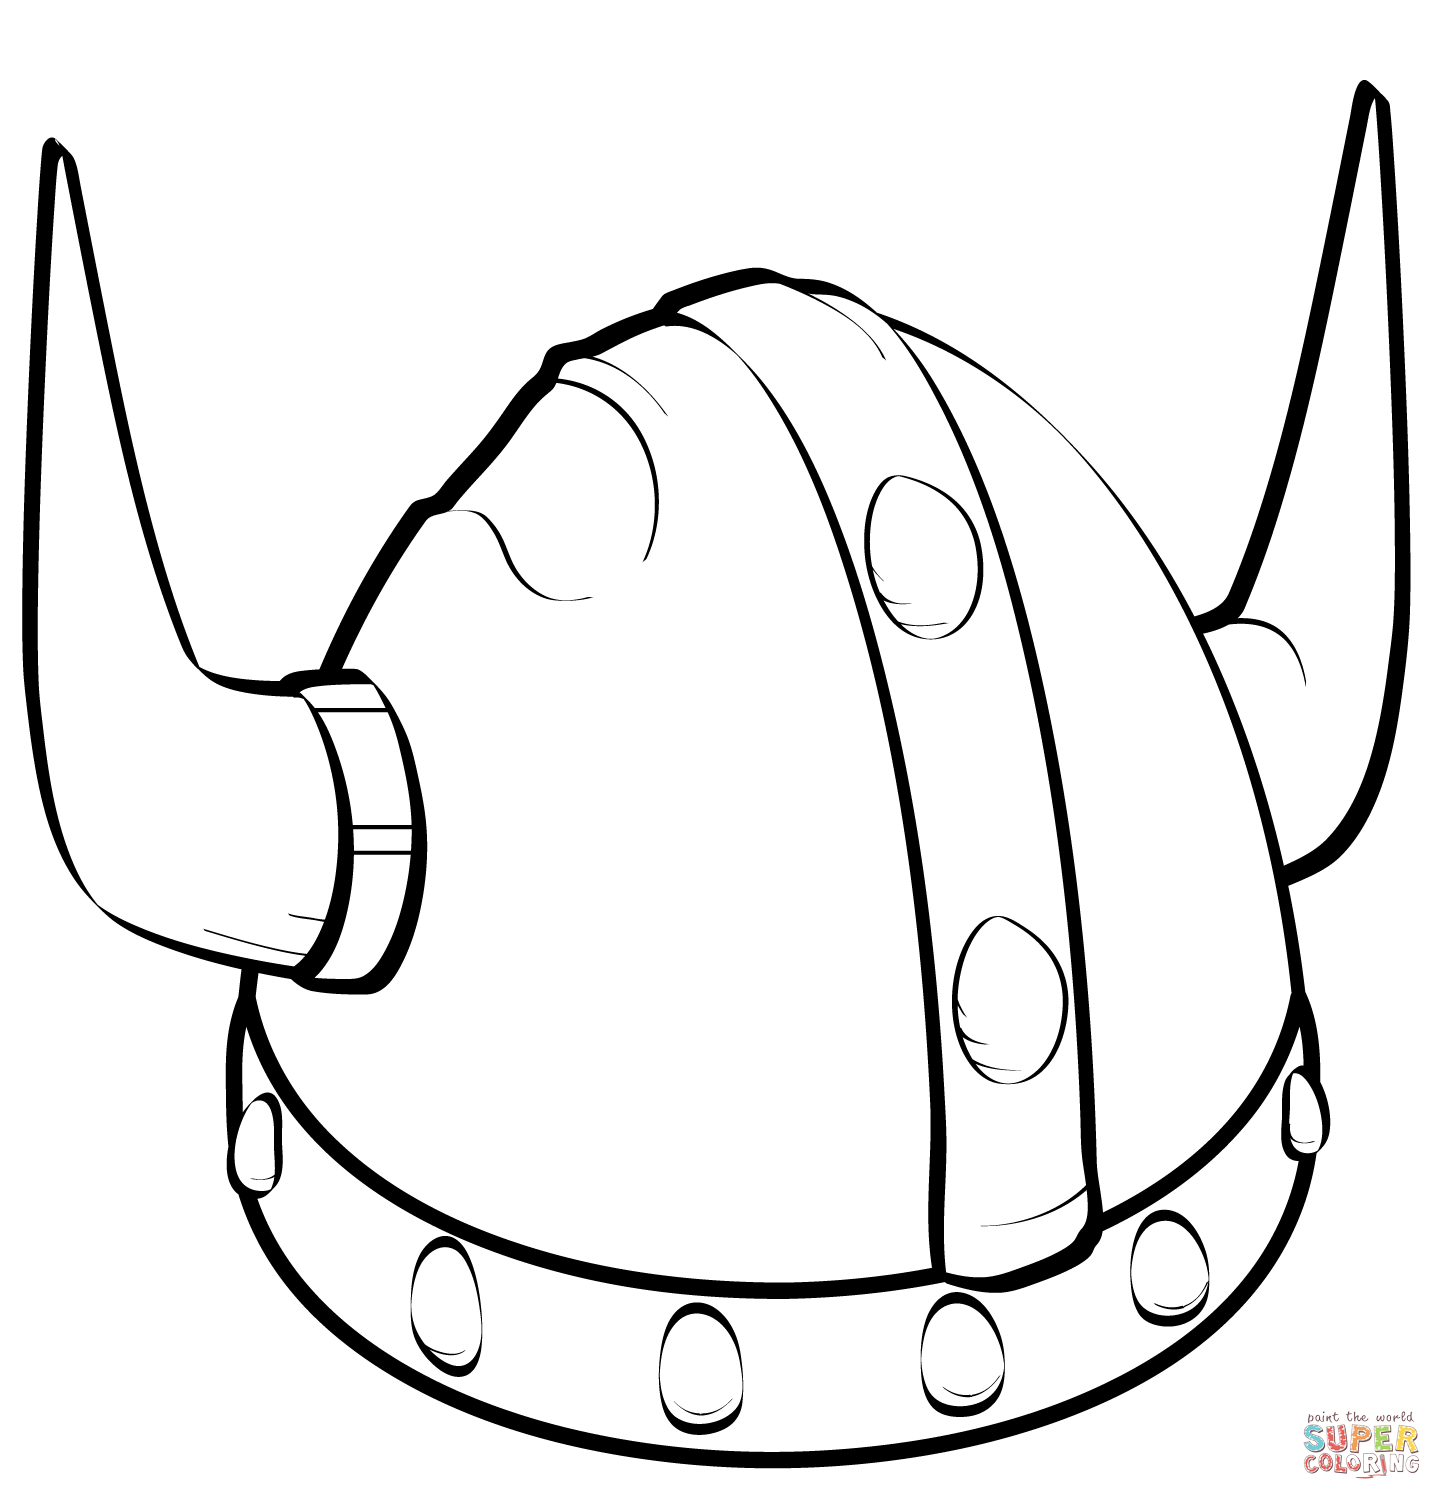 Viking Helmet coloring page | Free Printable Coloring Pages